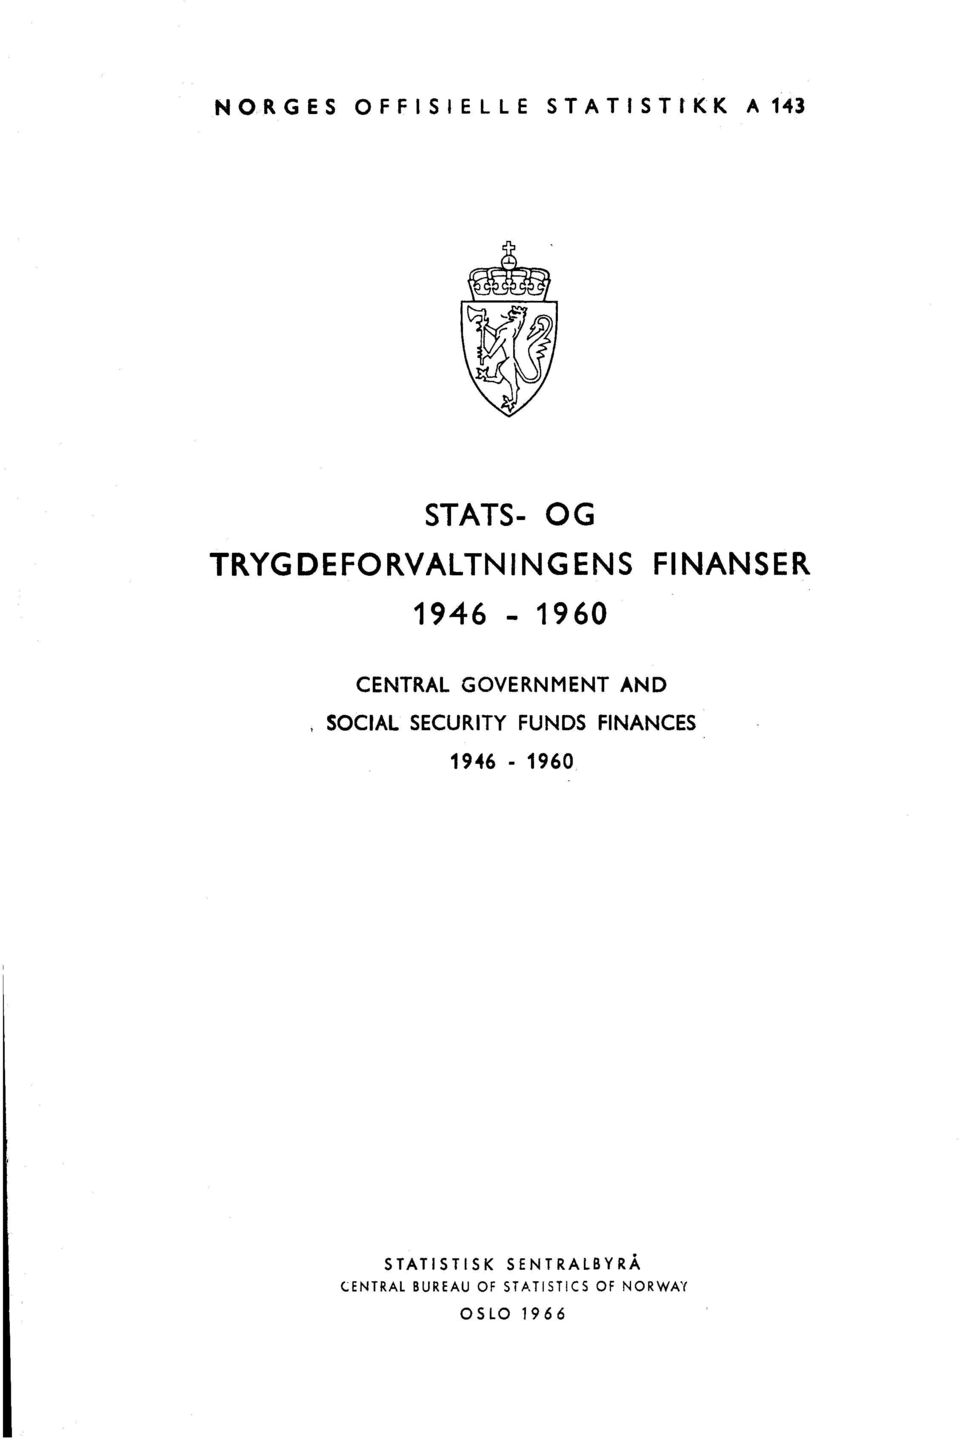 GOVERNMENT AND SOCIAL SECURITY FUNDS FINANCES 1946